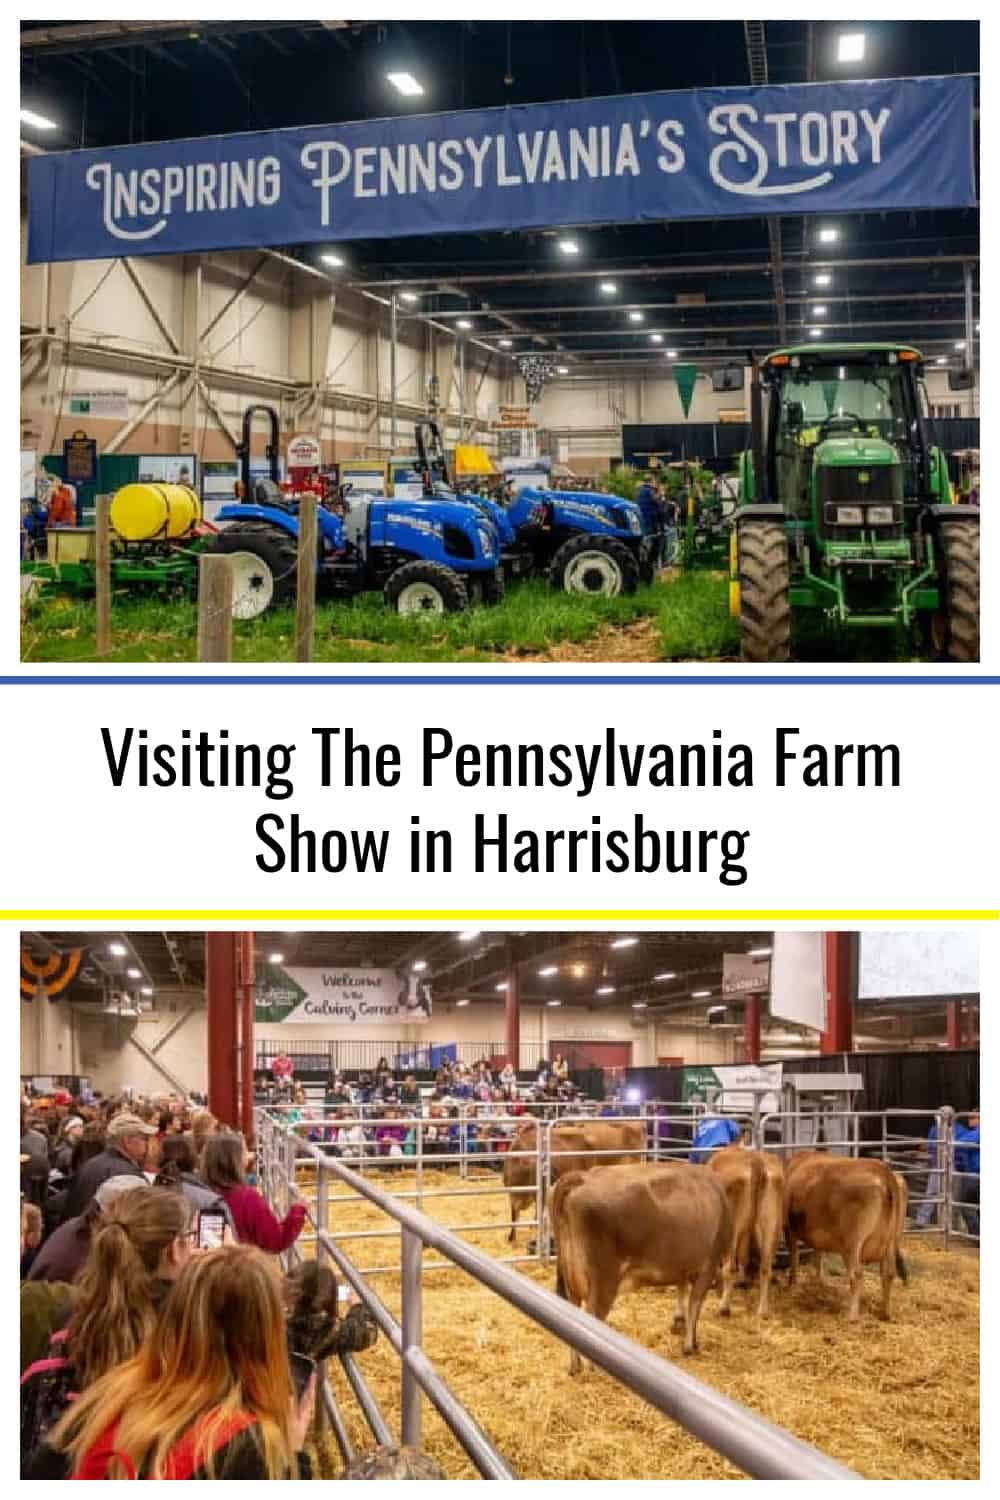 The Pennsylvania Farm Show in Harrisburg Everything You Need to Know